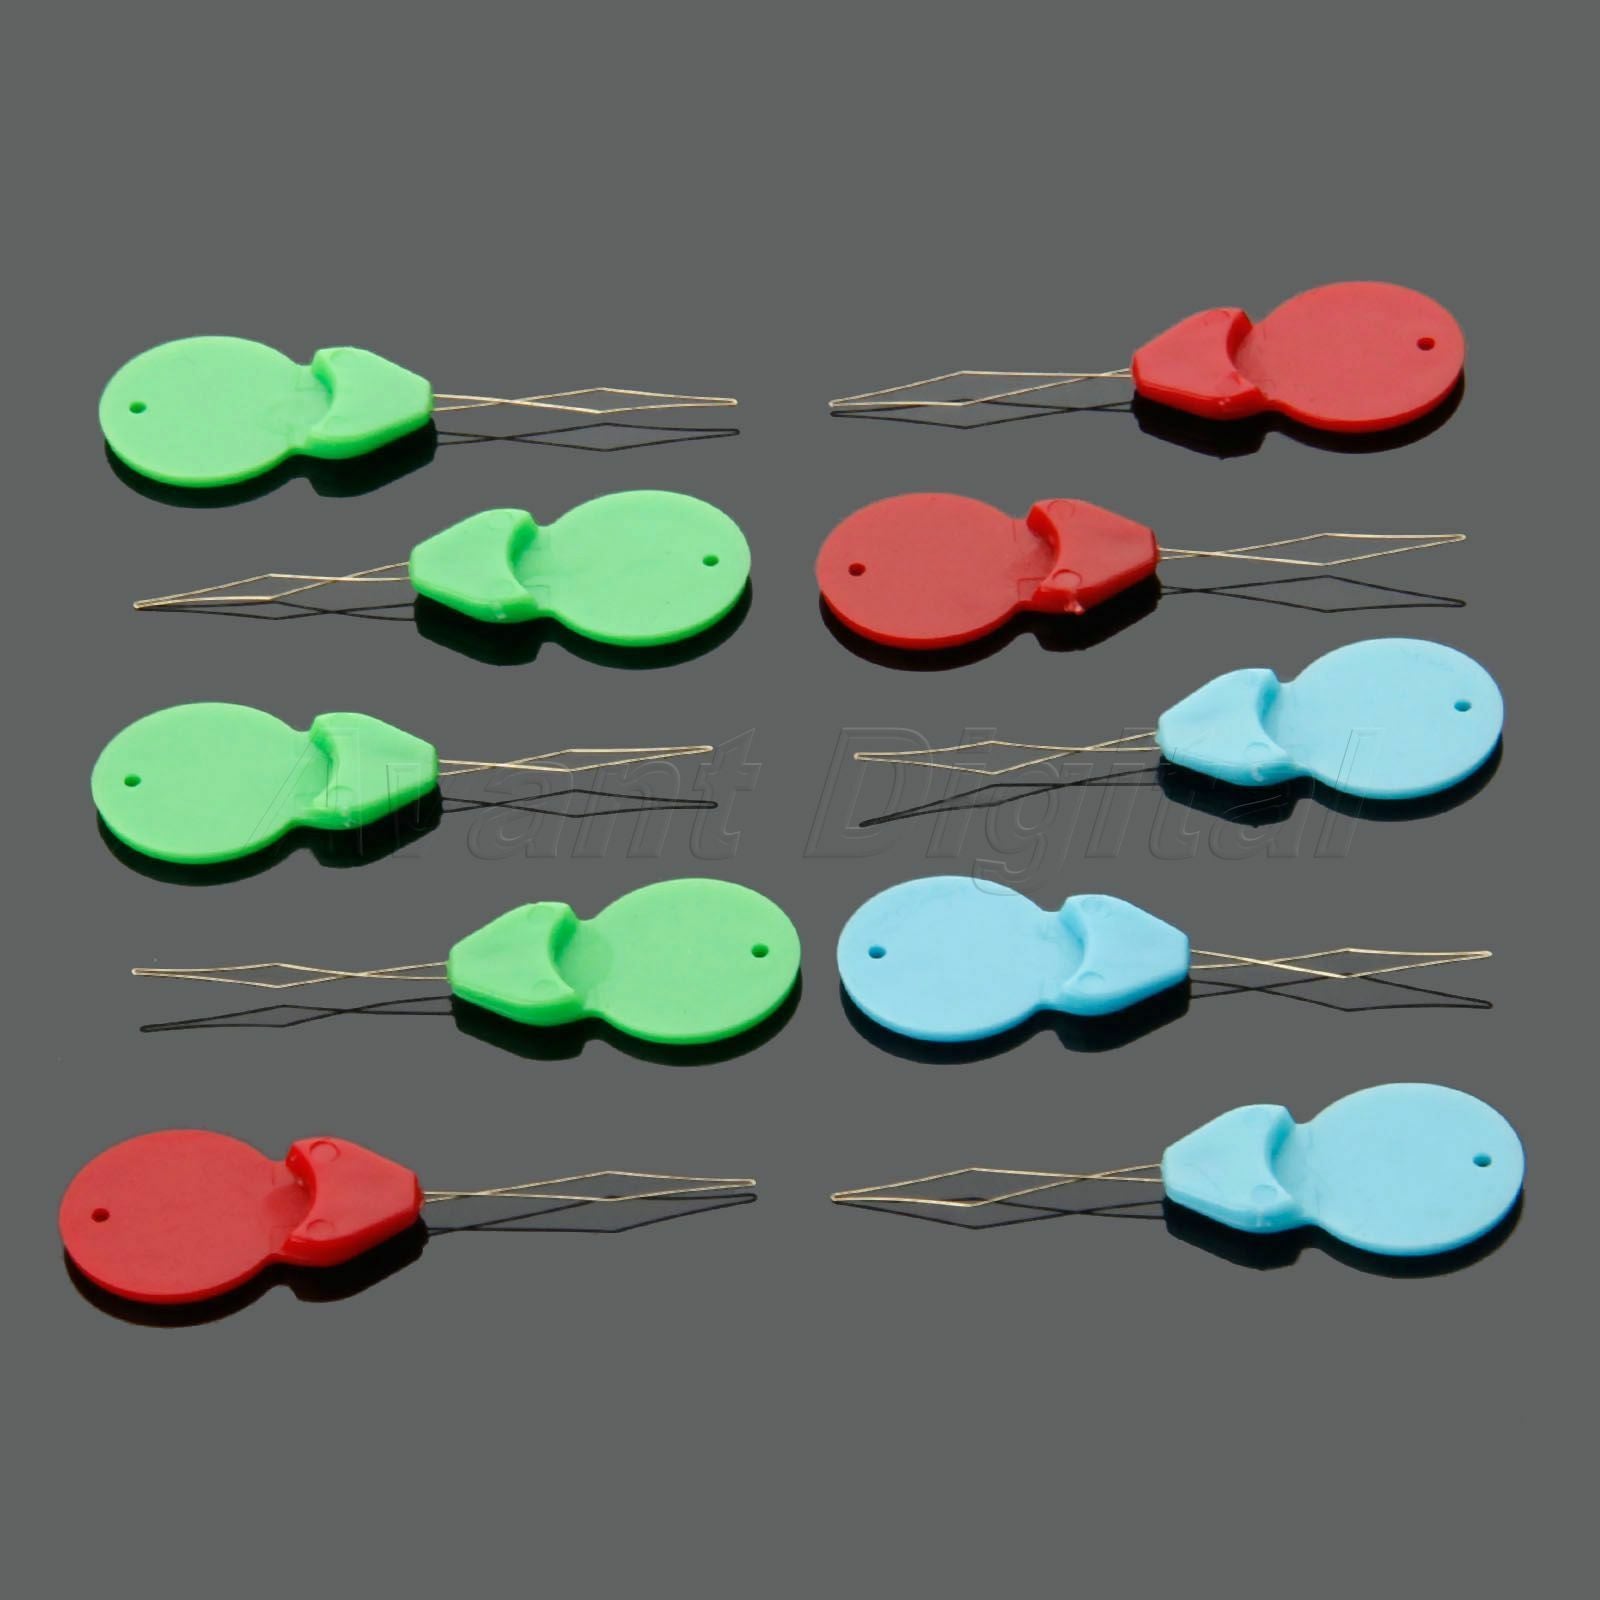 10pcs Thread Guide Knitting Craft Kit Needle Threader Sewing Wire Punch Tools